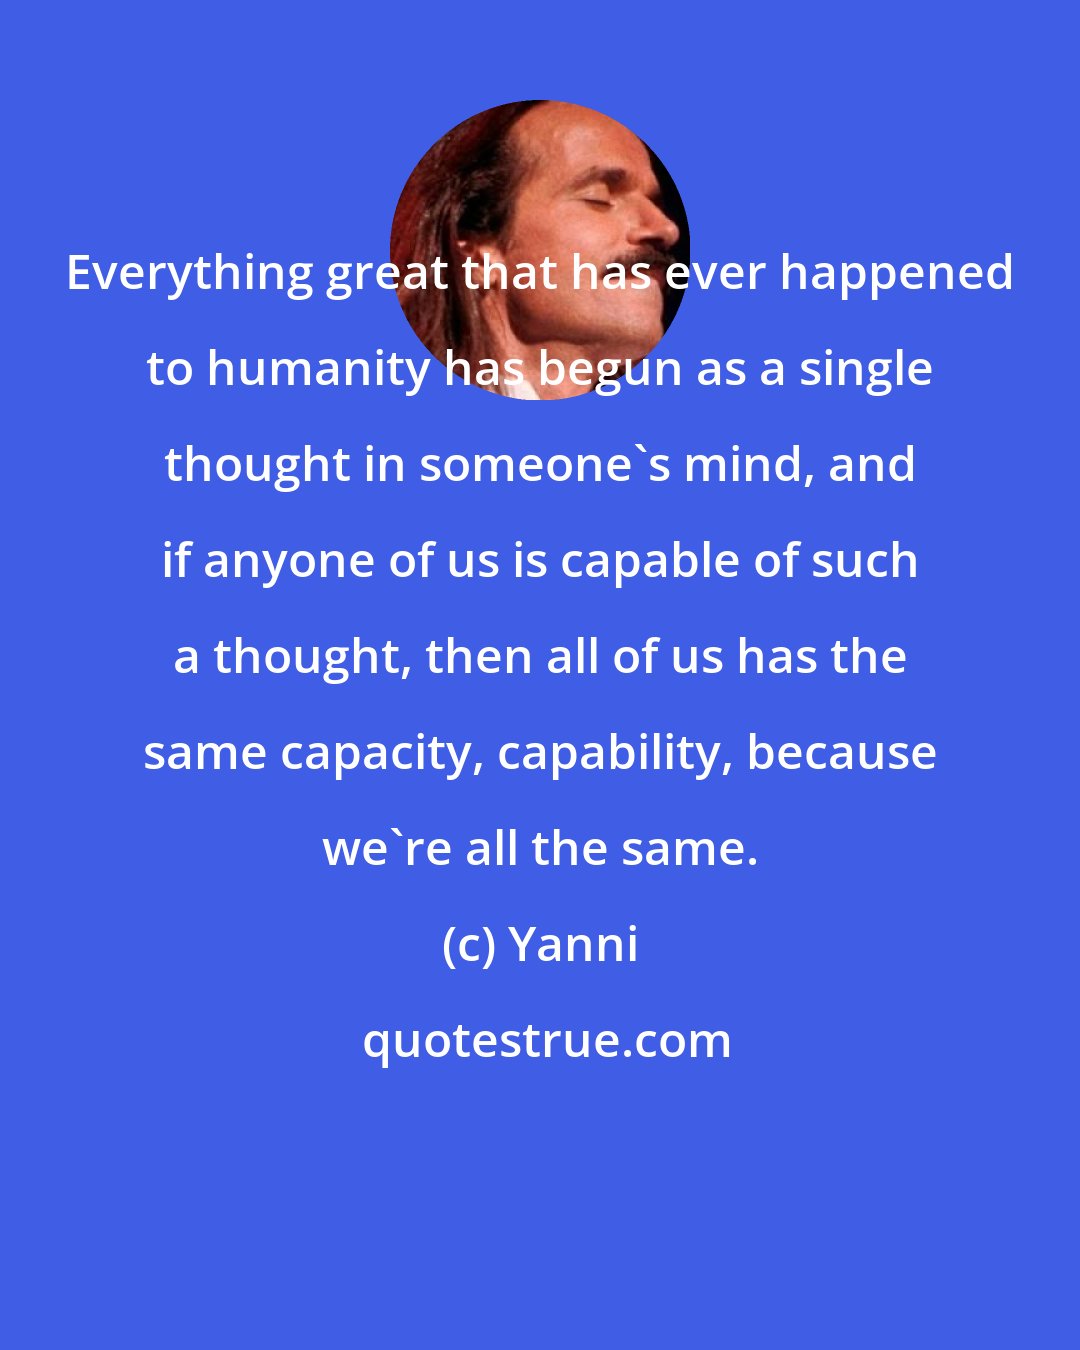 Yanni: Everything great that has ever happened to humanity has begun as a single thought in someone's mind, and if anyone of us is capable of such a thought, then all of us has the same capacity, capability, because we're all the same.